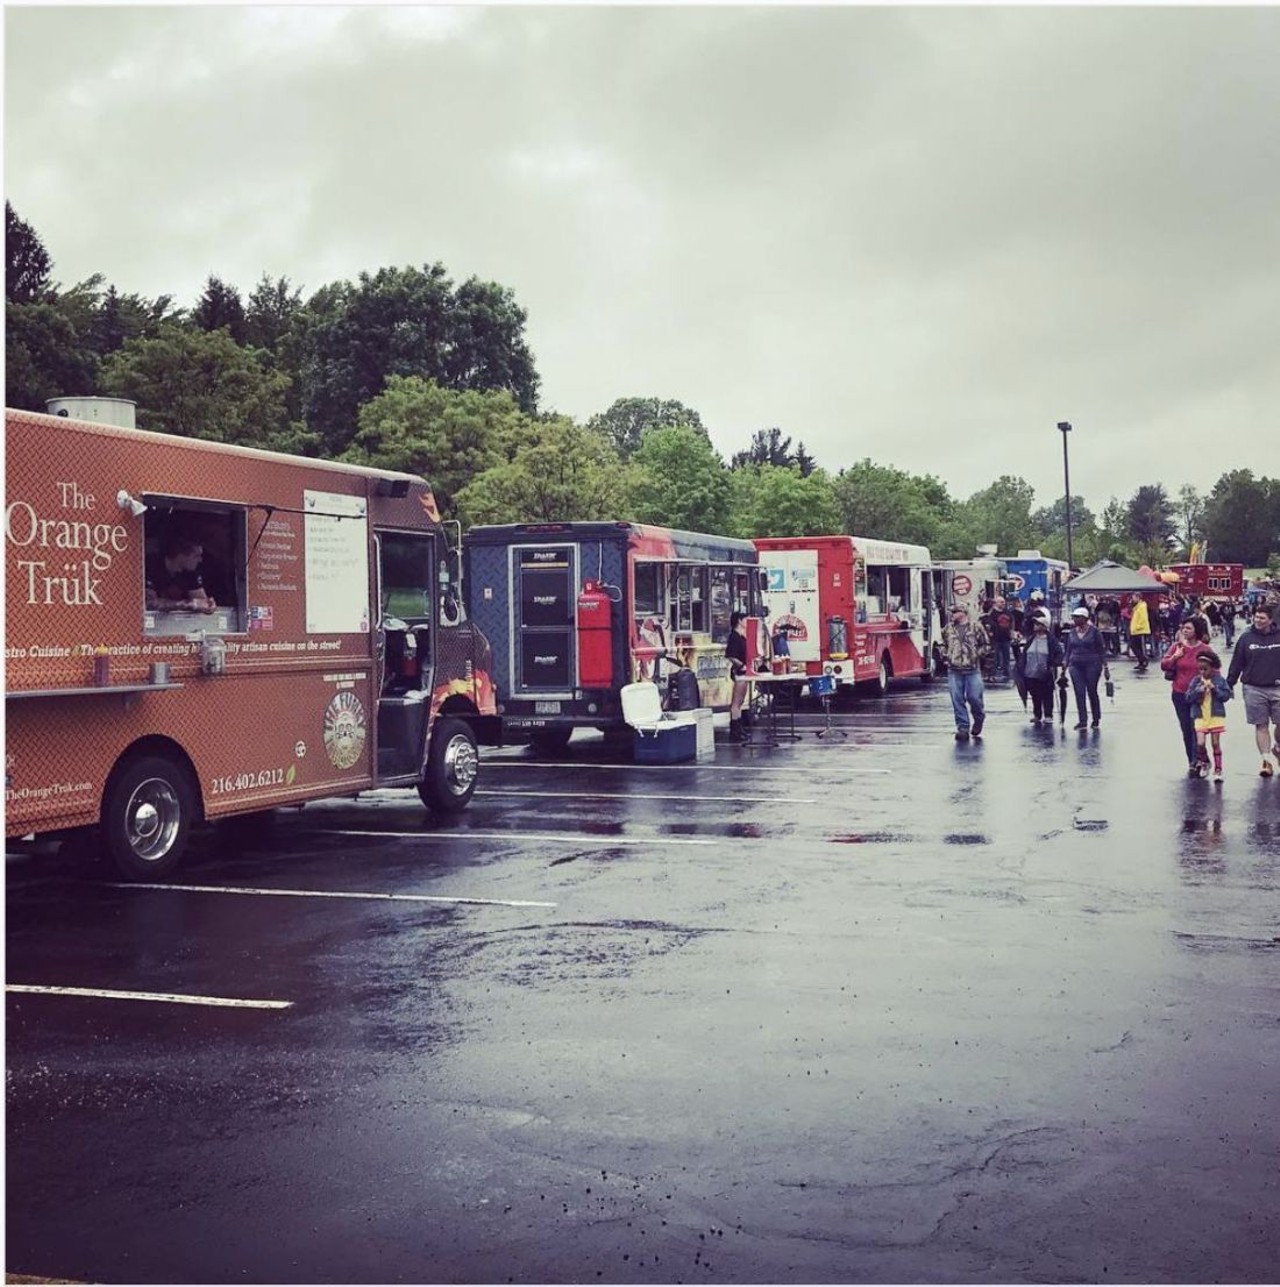 Tallmadge Food Truck Festival
May 19, 11 a.m. to 6 p.m.
229 East Howe Rd., Tallmadge
Head to the Summit County Fairgrounds for a festival featuring over 30 food trucks. The 6th annual Tallmadge Food Truck Festival, in addition to great vendors like Manna, Krav, East Coast Custard, Hatfield&#146;s Goode Grub and Wholly Frijoles, also will have live entertainment and activities for the young ones. Admission is free.
Photo via @Jeph430/Instagram